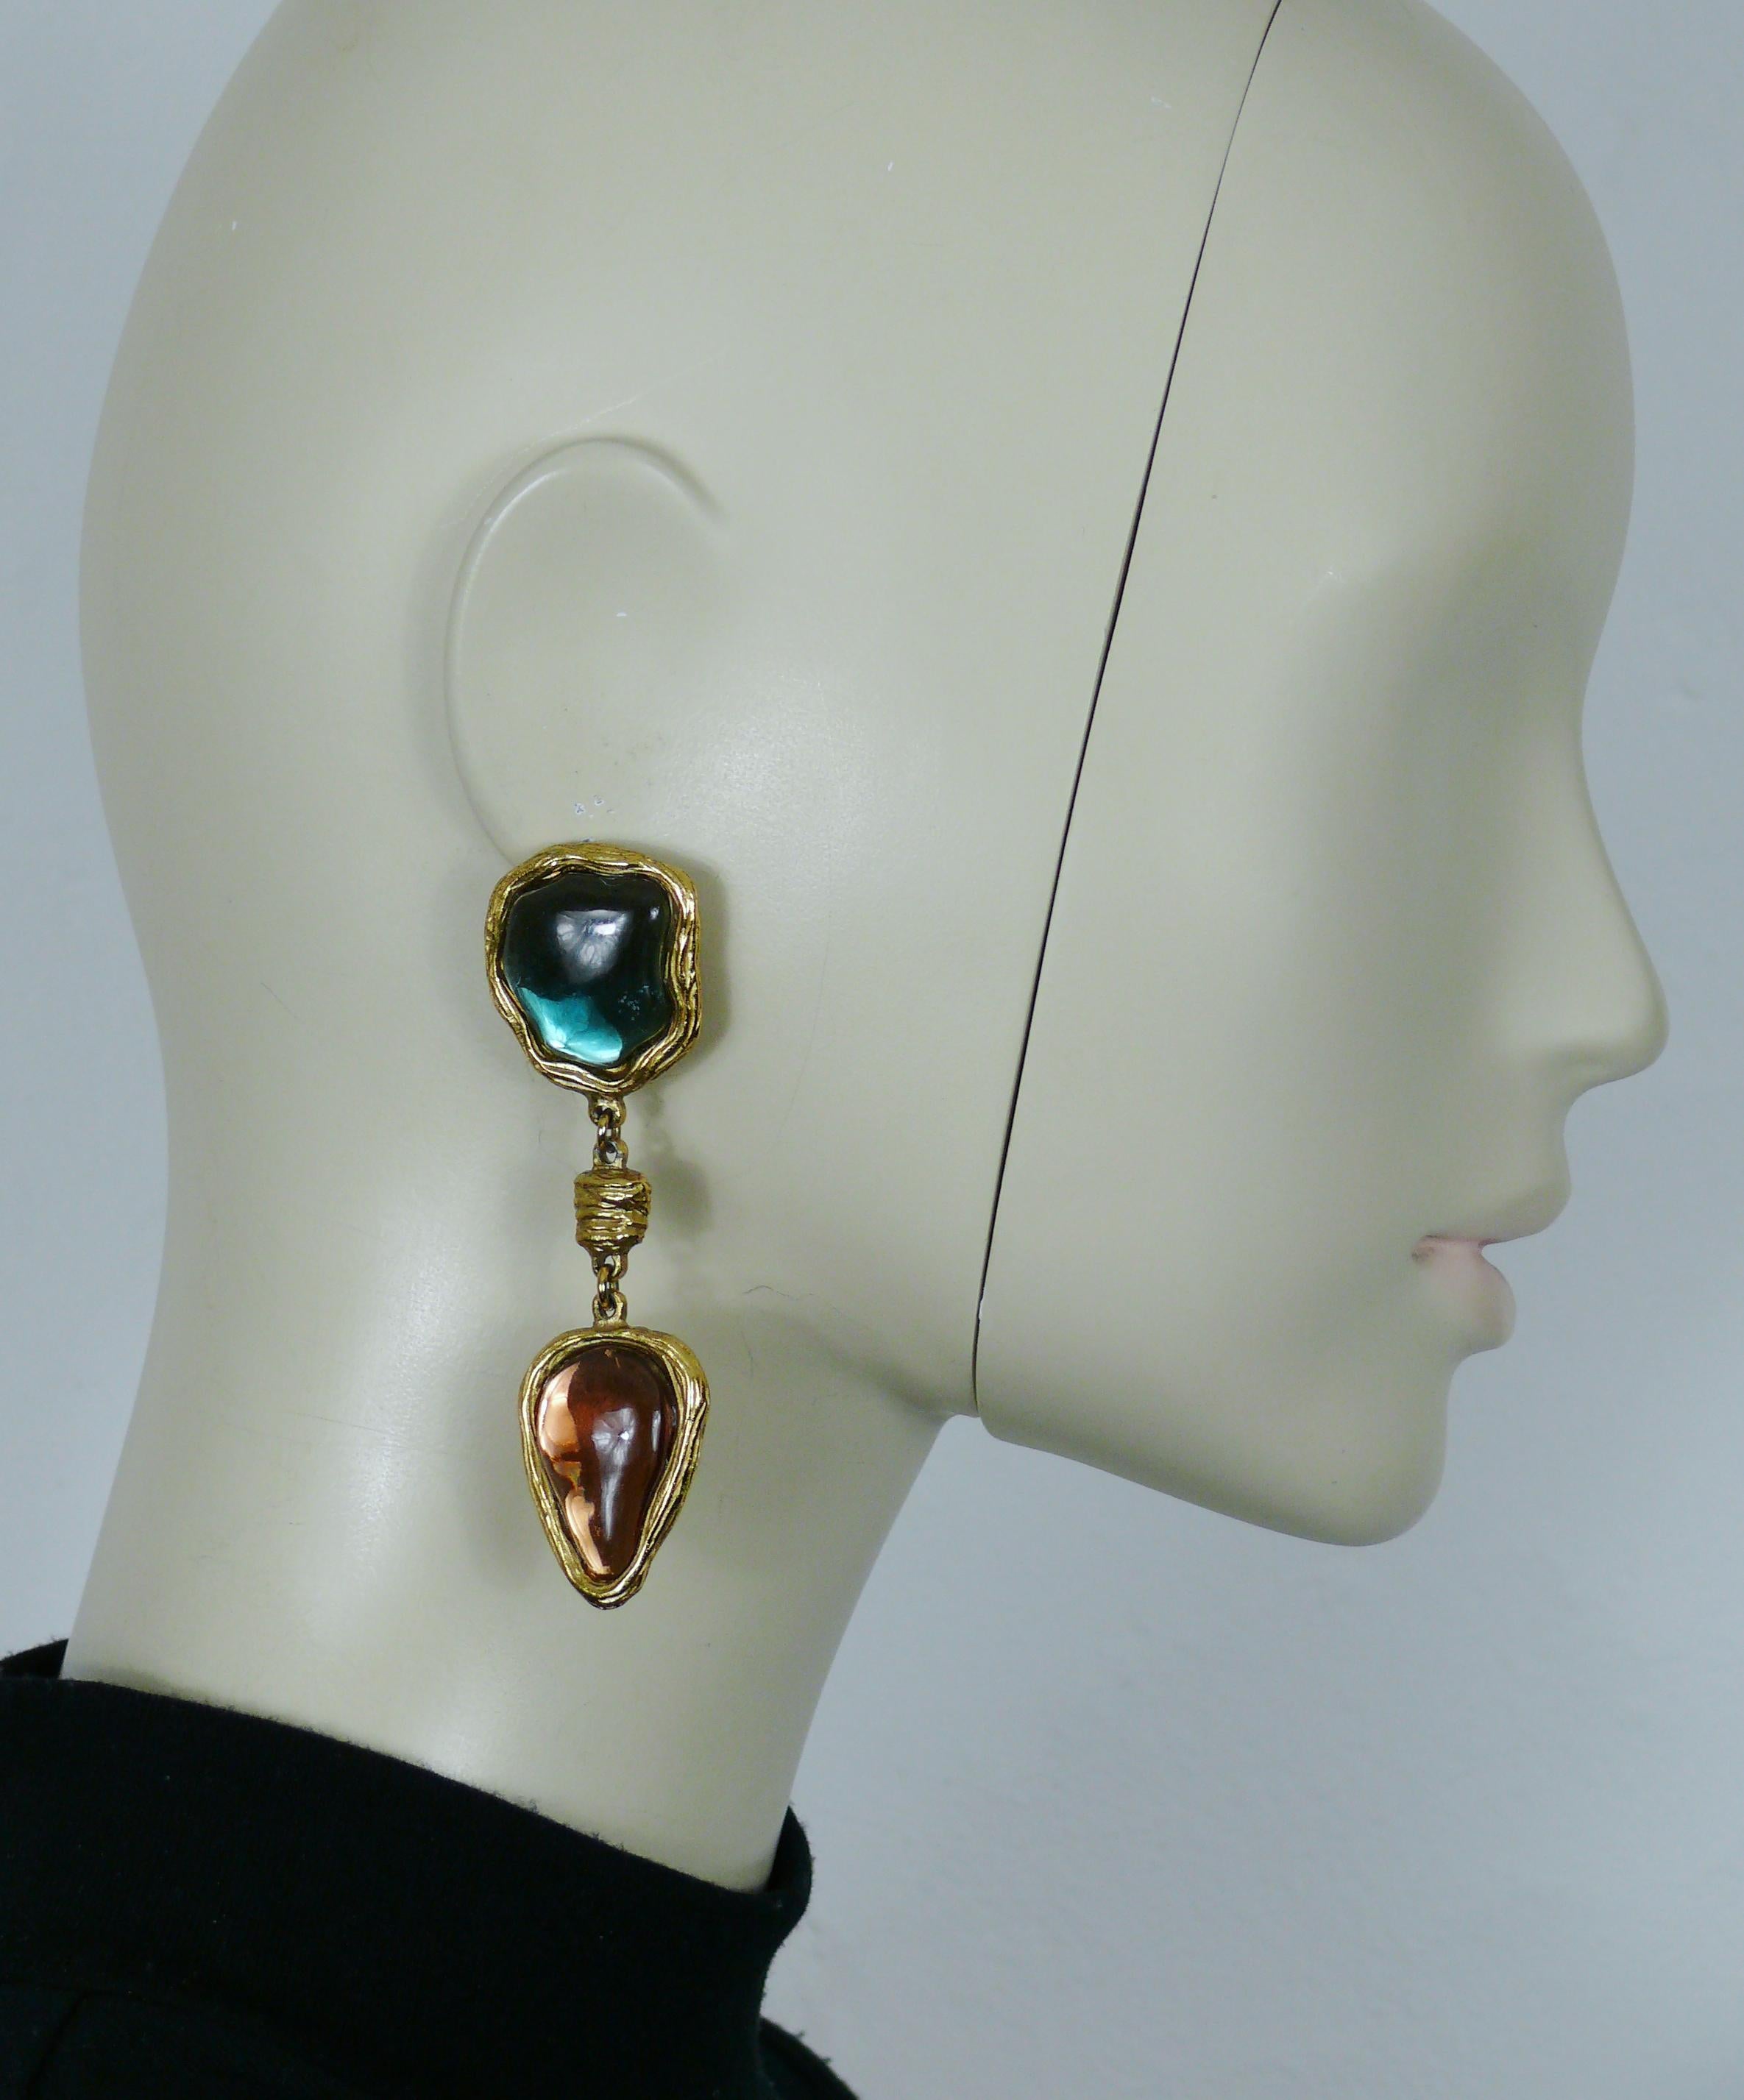 CHARLES JOURDAN vintage gold tone dangling earrings (clip-on) featuring irregular shaped blue and plum colour resin cabochons.

Embossed CHARLES JOURDAN Paris.

Indicative measurements : height approx. 8.4 cm (3.31 inches) / max. width approx. 2.4